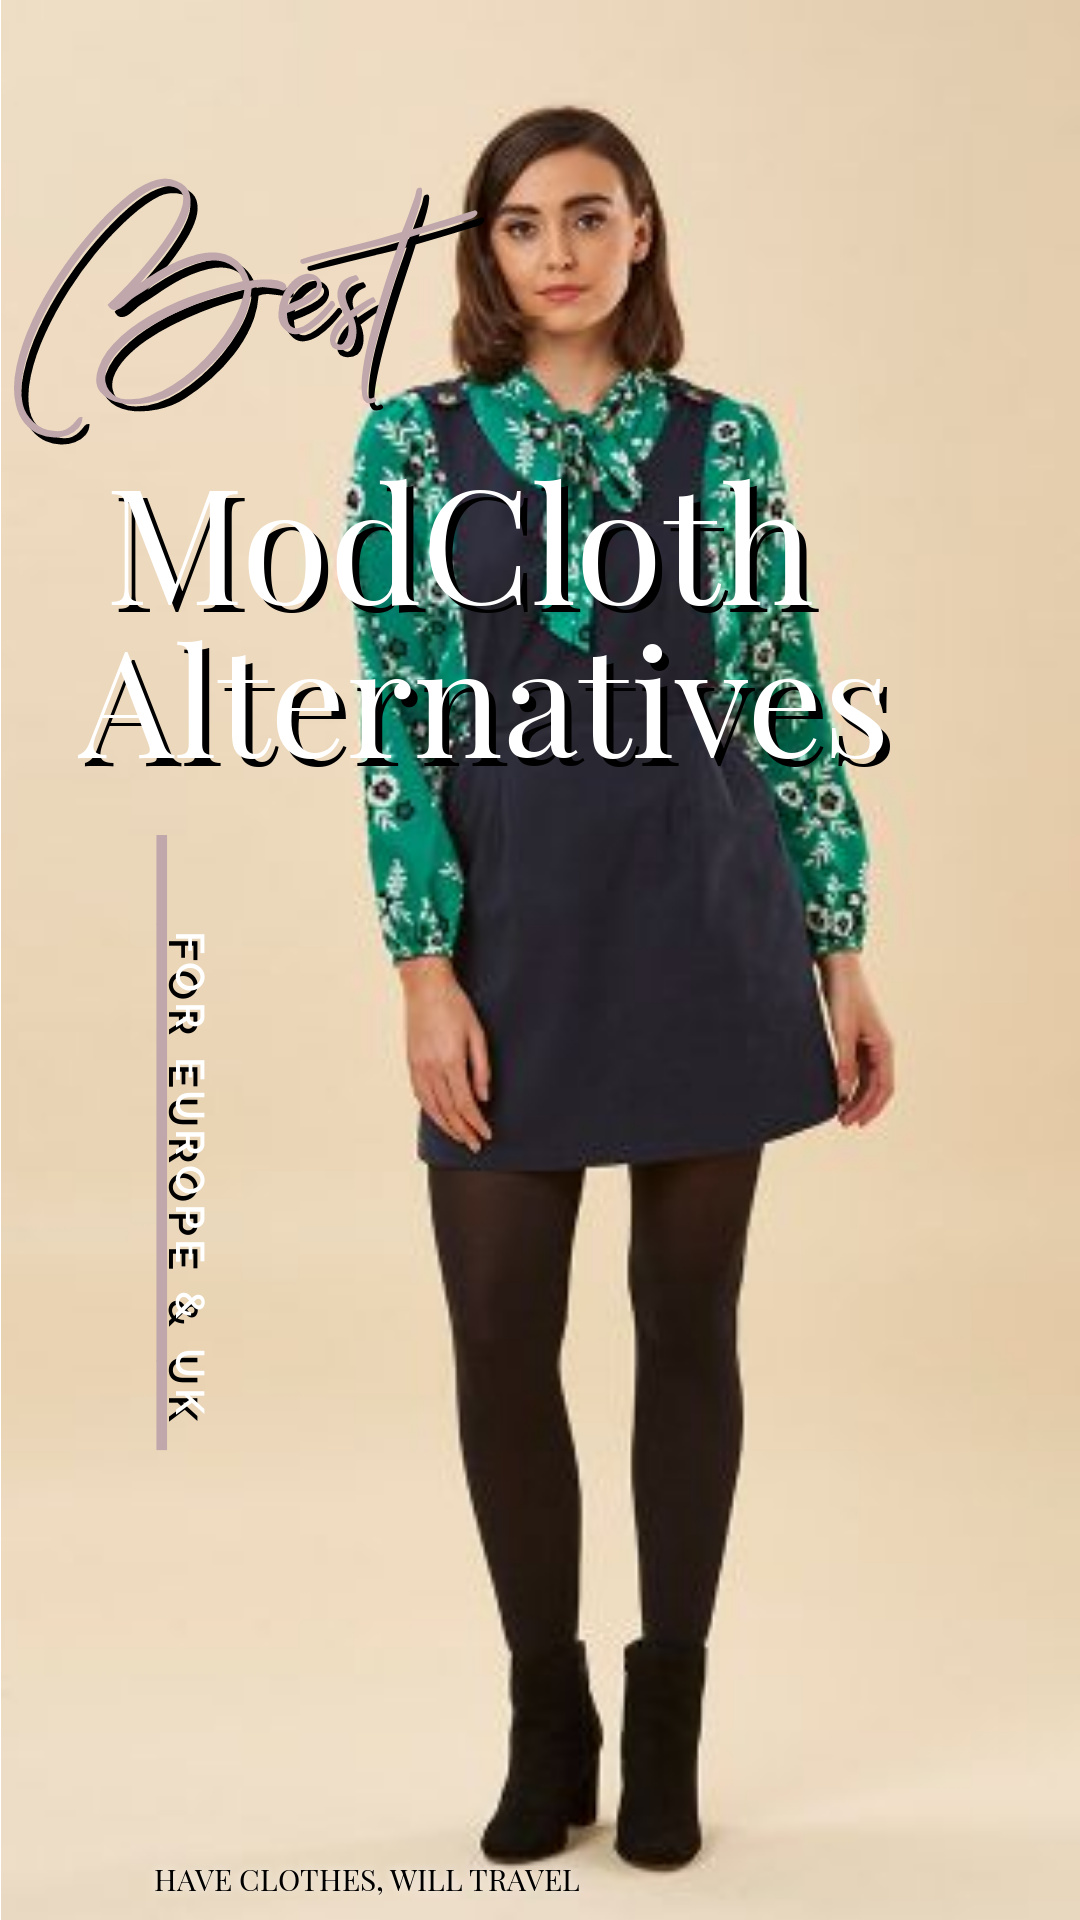 An image of a model wearing a navy blue dress over a long-sleeve green blouse. Text over the image reads "Best ModCloth Alternatives for Europe & UK"